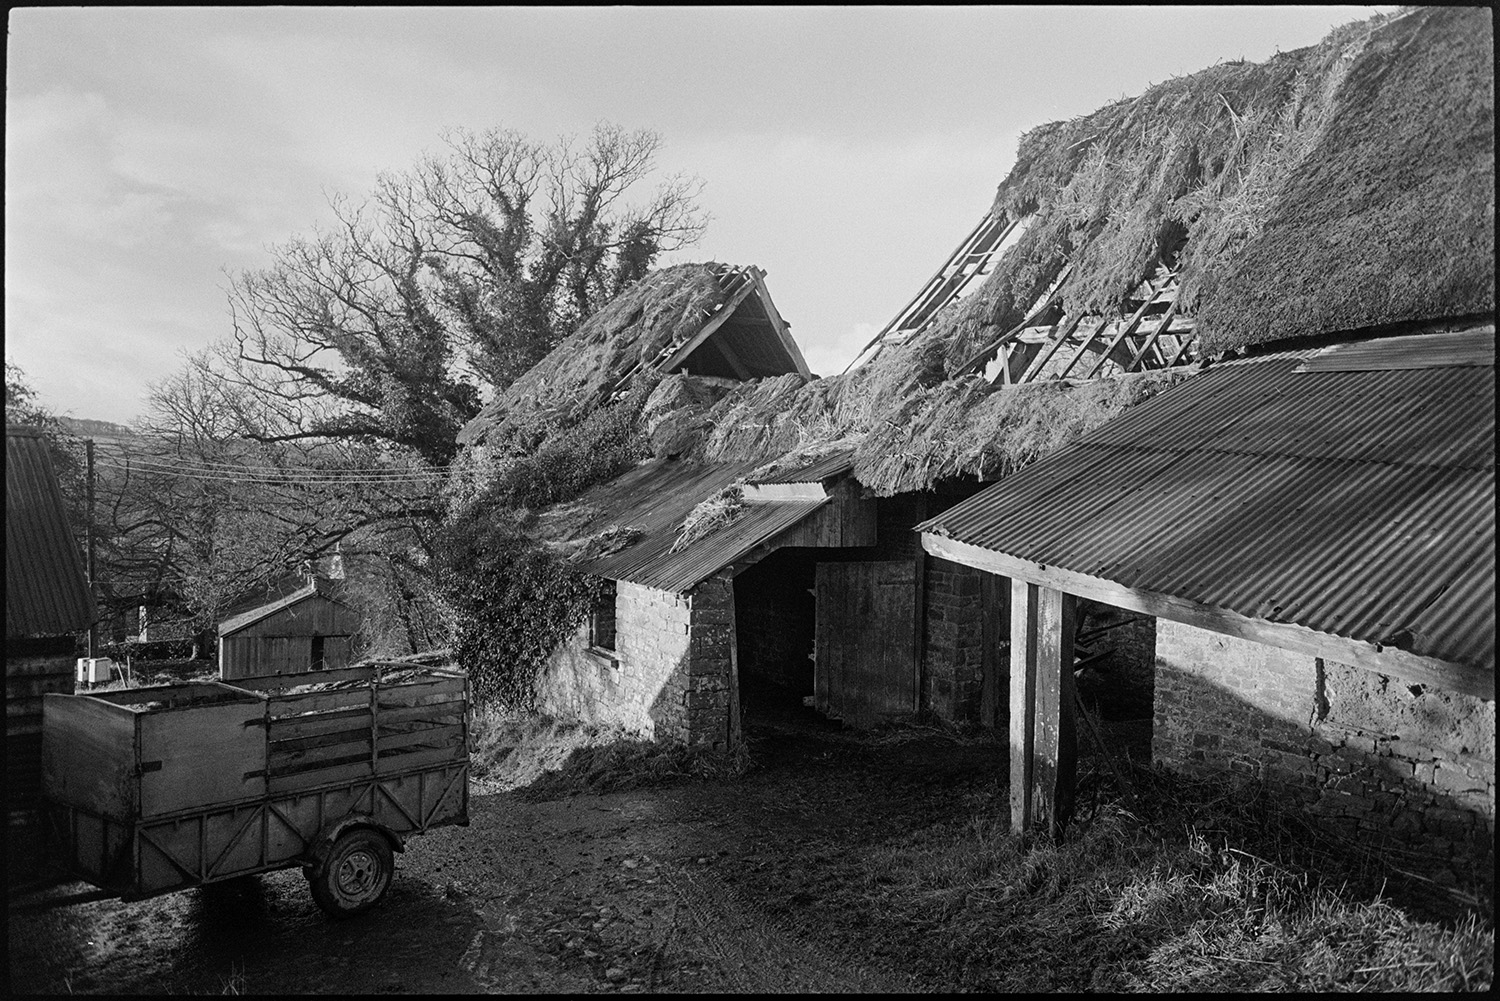 Collapsed cob and thatch barn, fallen oak beams. Now restored by new owners.
[Exterior of a cob and thatch barn with a partially collapsed roof, exposing oak beams, at Colleton Manor, Chulmleigh. The barn has been extended with a shelter with a corrugated iron roof. A trailer is parked in front of the entrance. The barn was later rebuilt.]